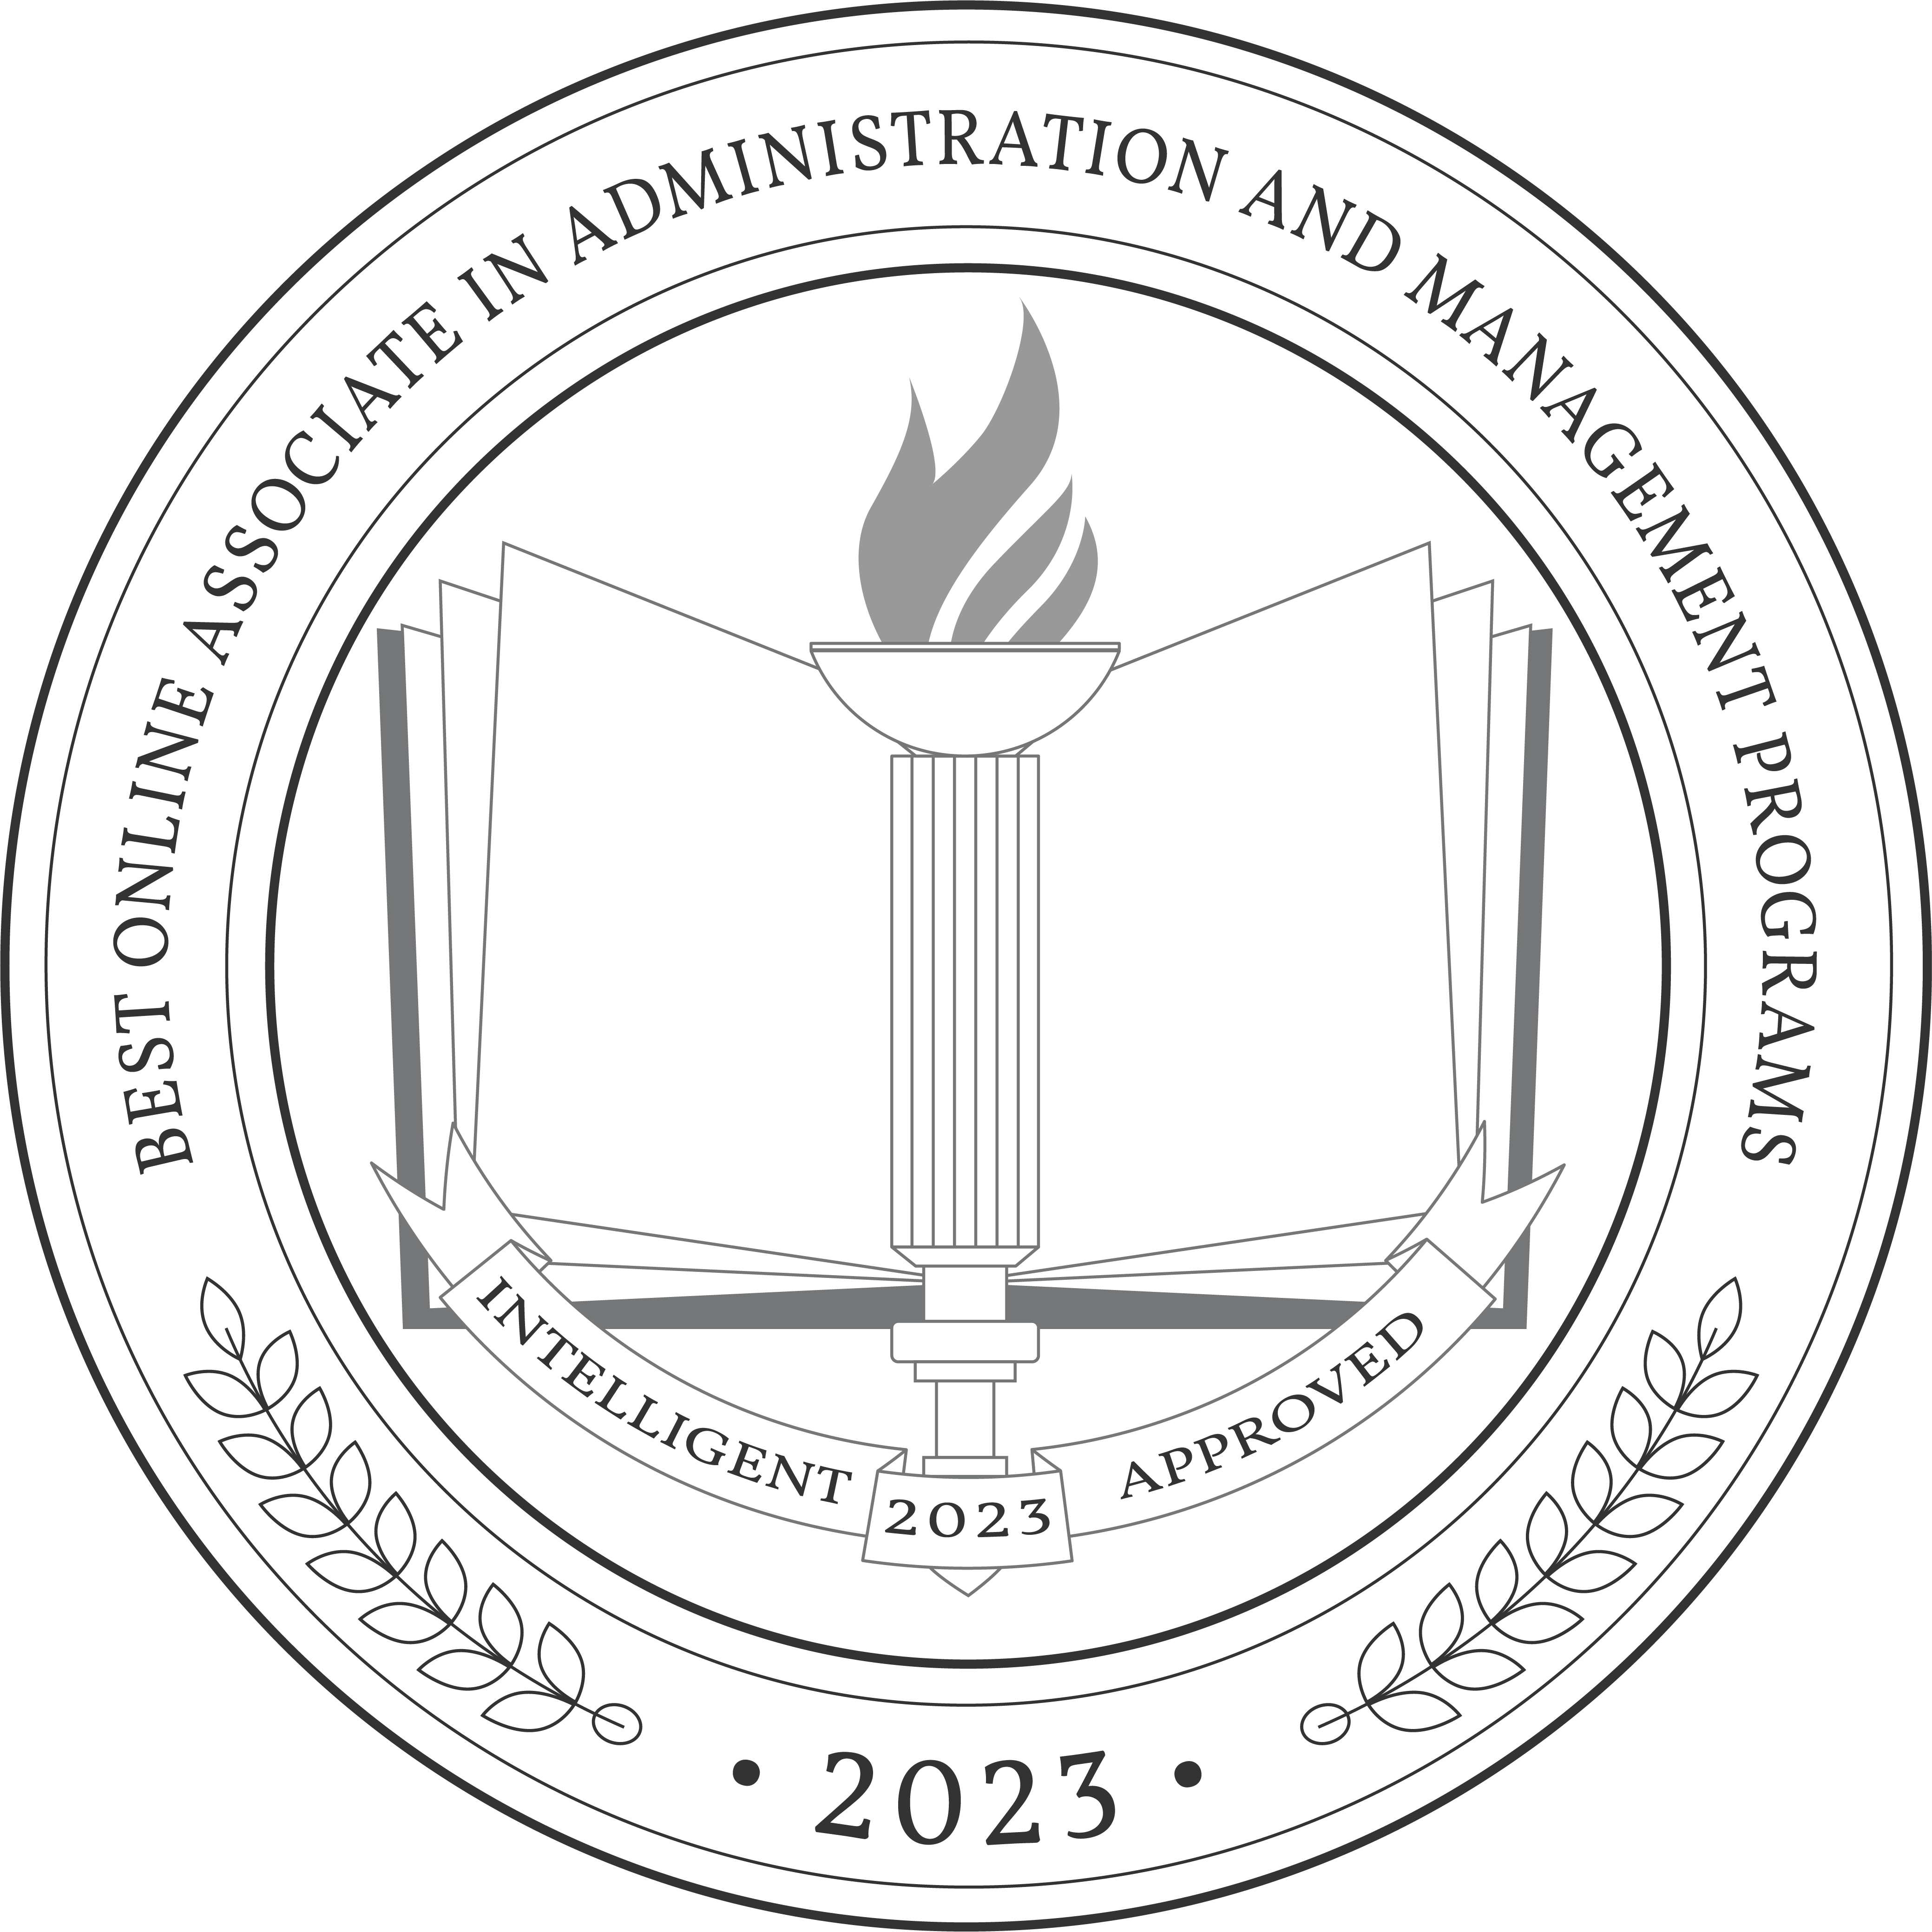 Best Online Associate in Administration and Management Programs badge